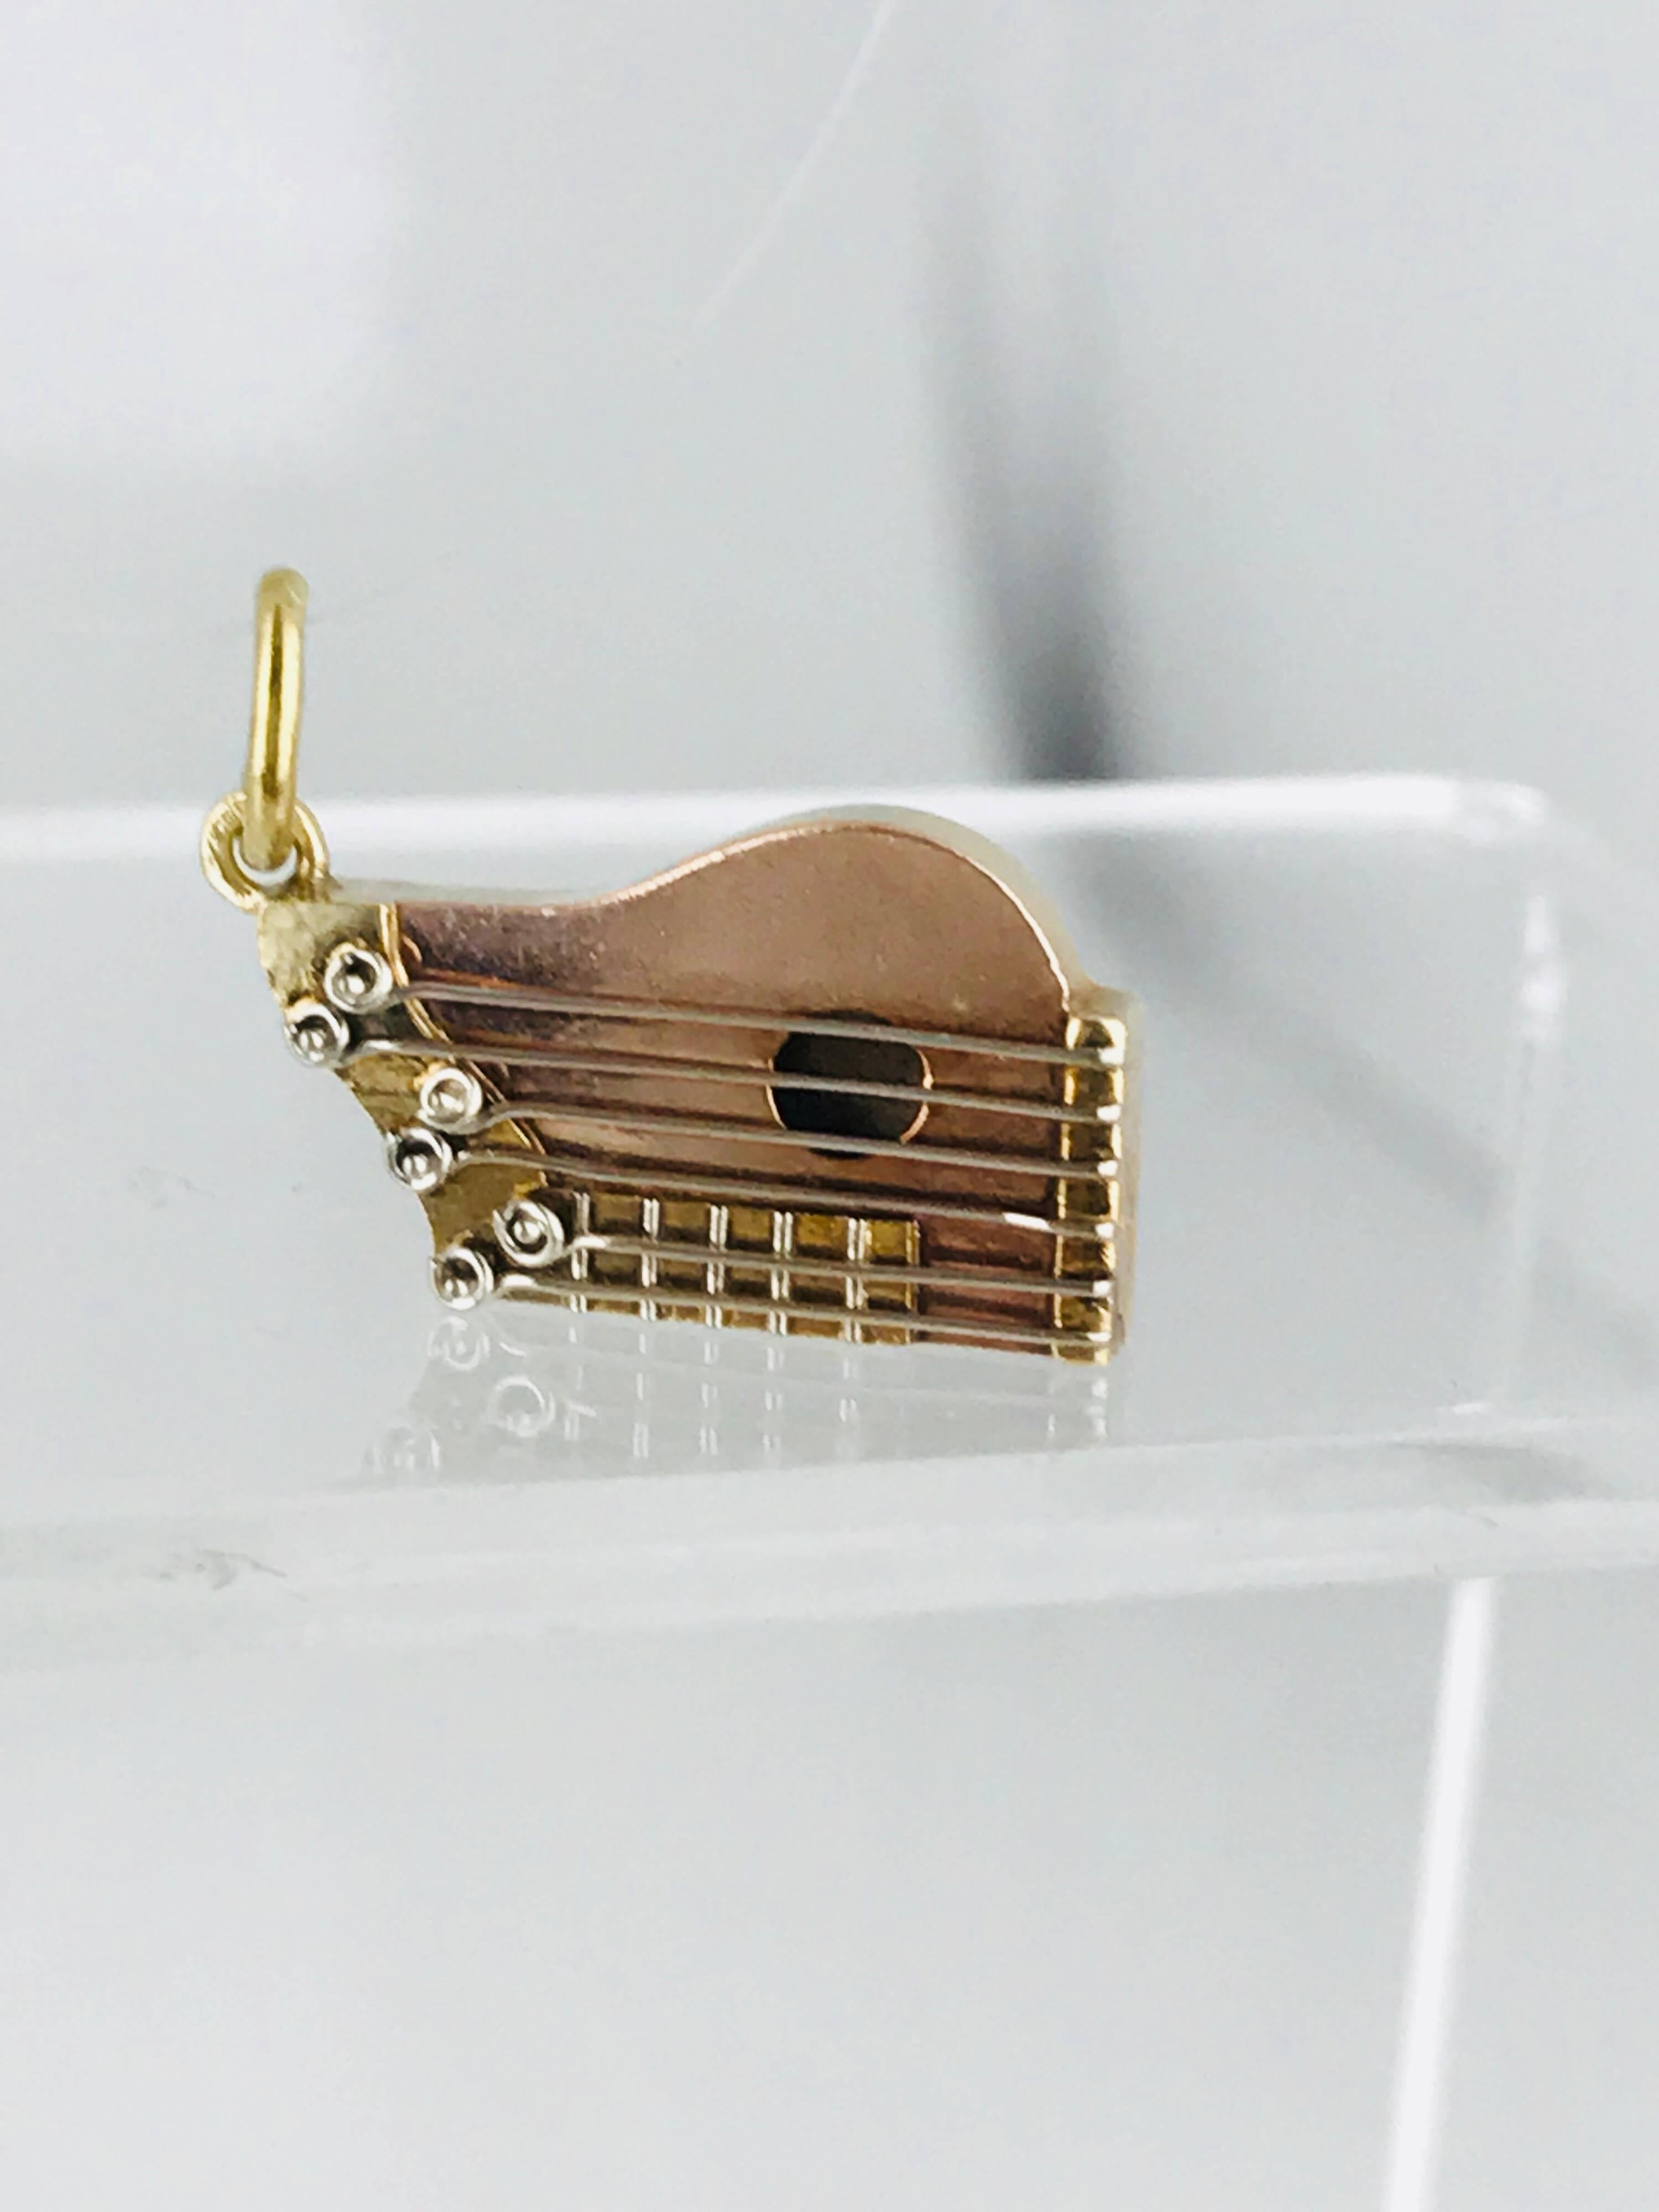 Zither Musical Instrument, Charm, 18 Karat Yellow Gold with White Strings, Rare For Sale 1